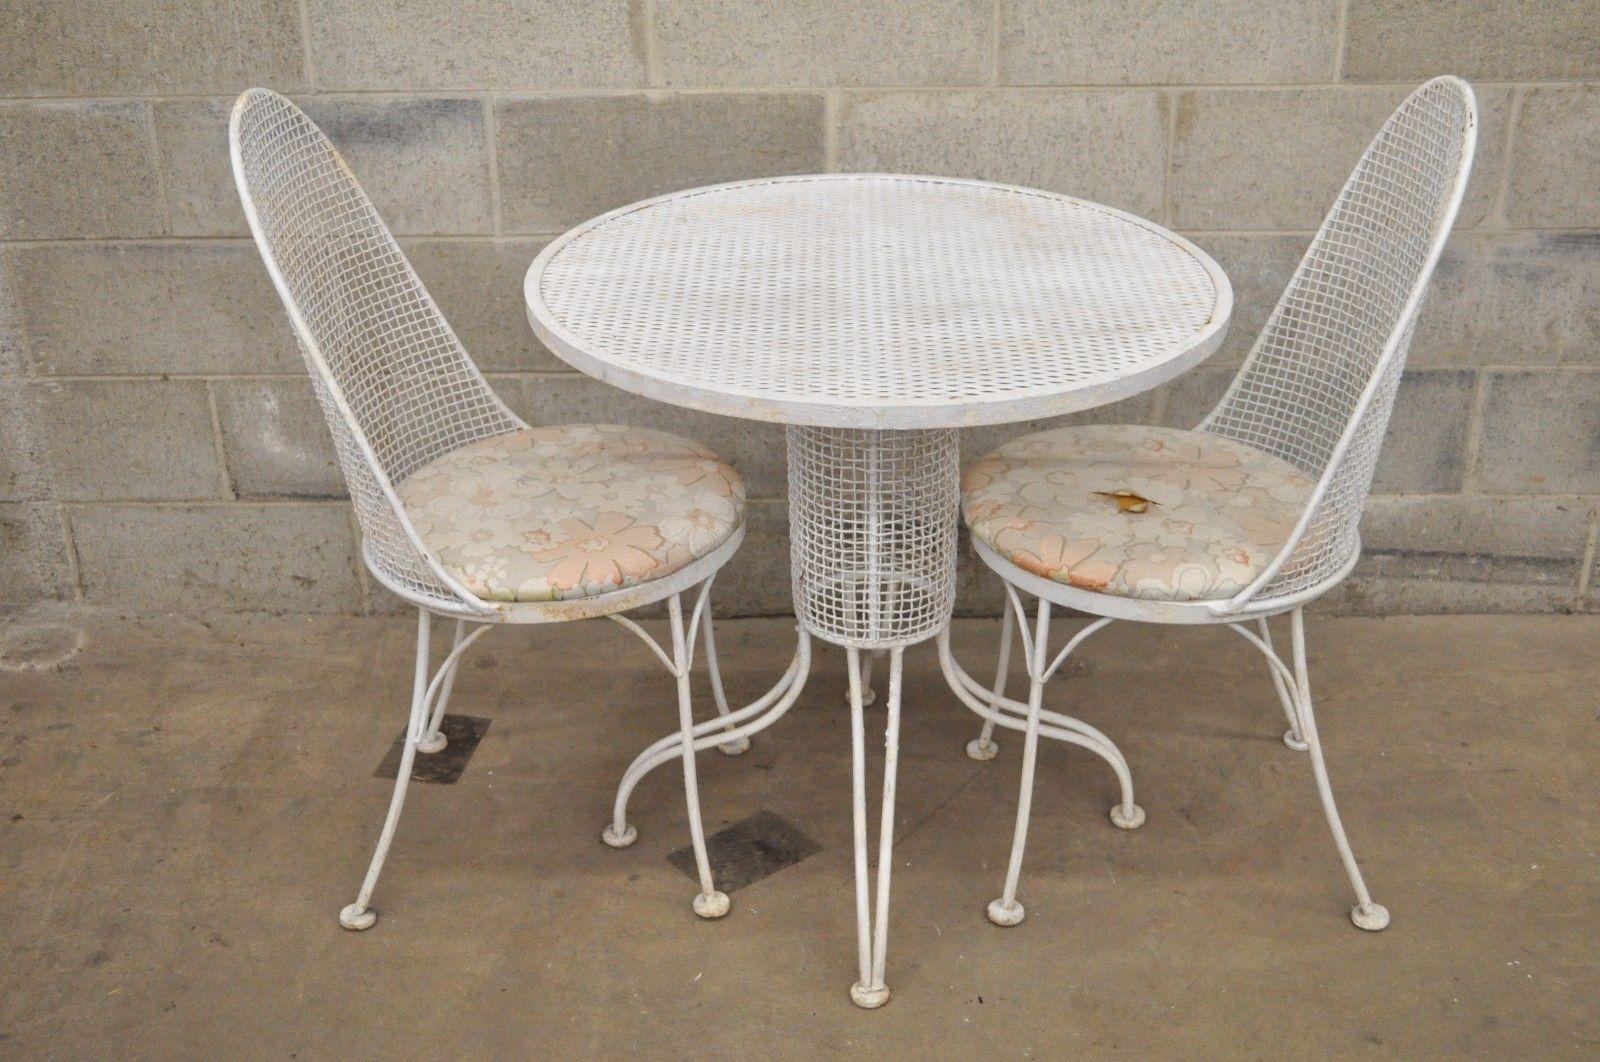 Very rare vintage three-piece iron metal mesh patio bistro dining set believed to be Russell Woodard. Item features iron metal mesh construction, round pedestal base dining table, two dining side chairs, round seats, oval backs, great modernist